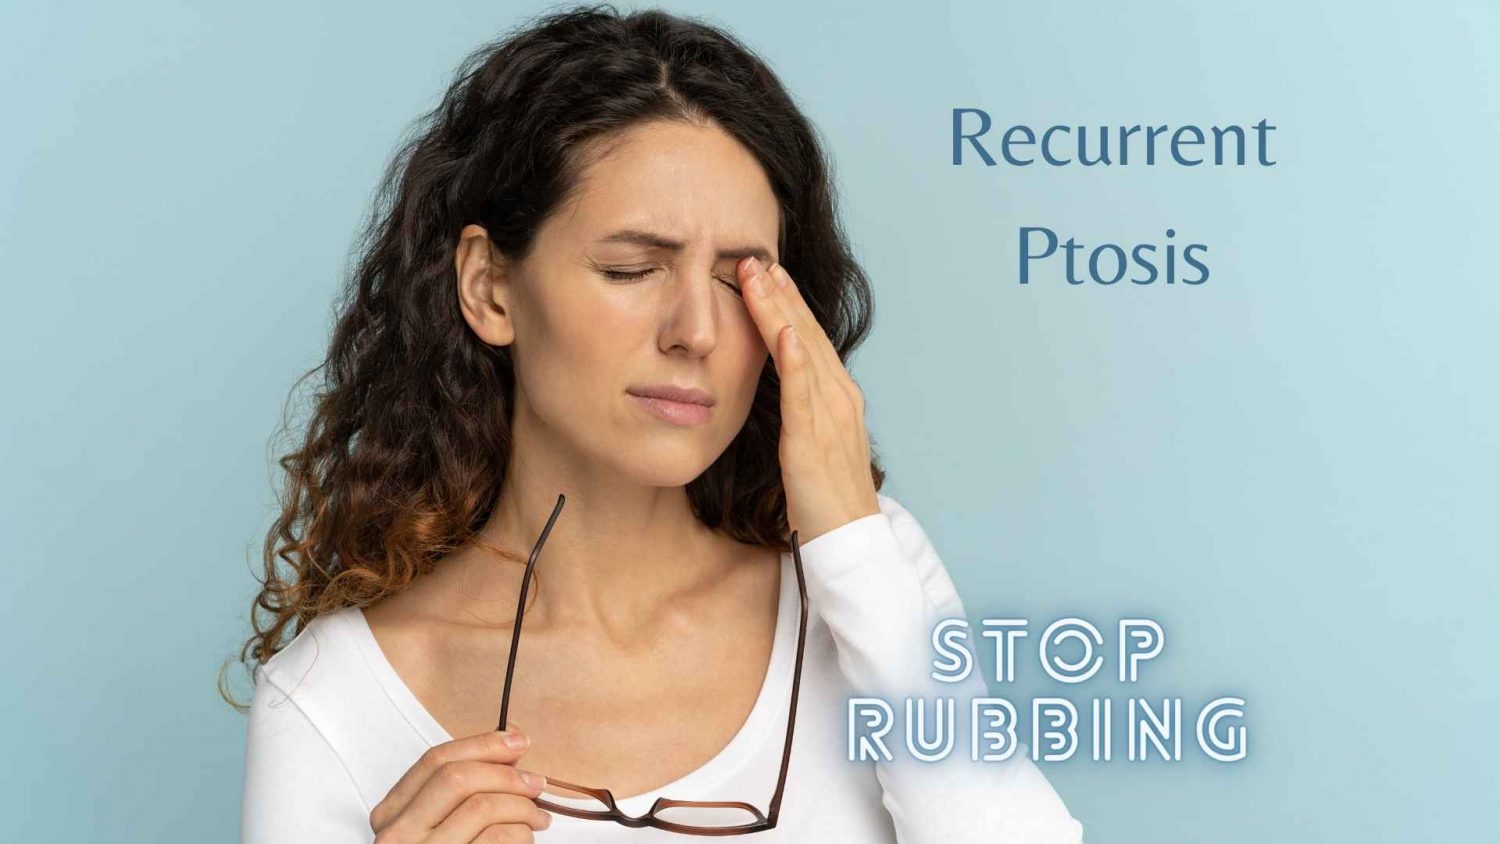 Lady rubbing her eyes causing recurrent ptosis. This will require ptosis surgery.